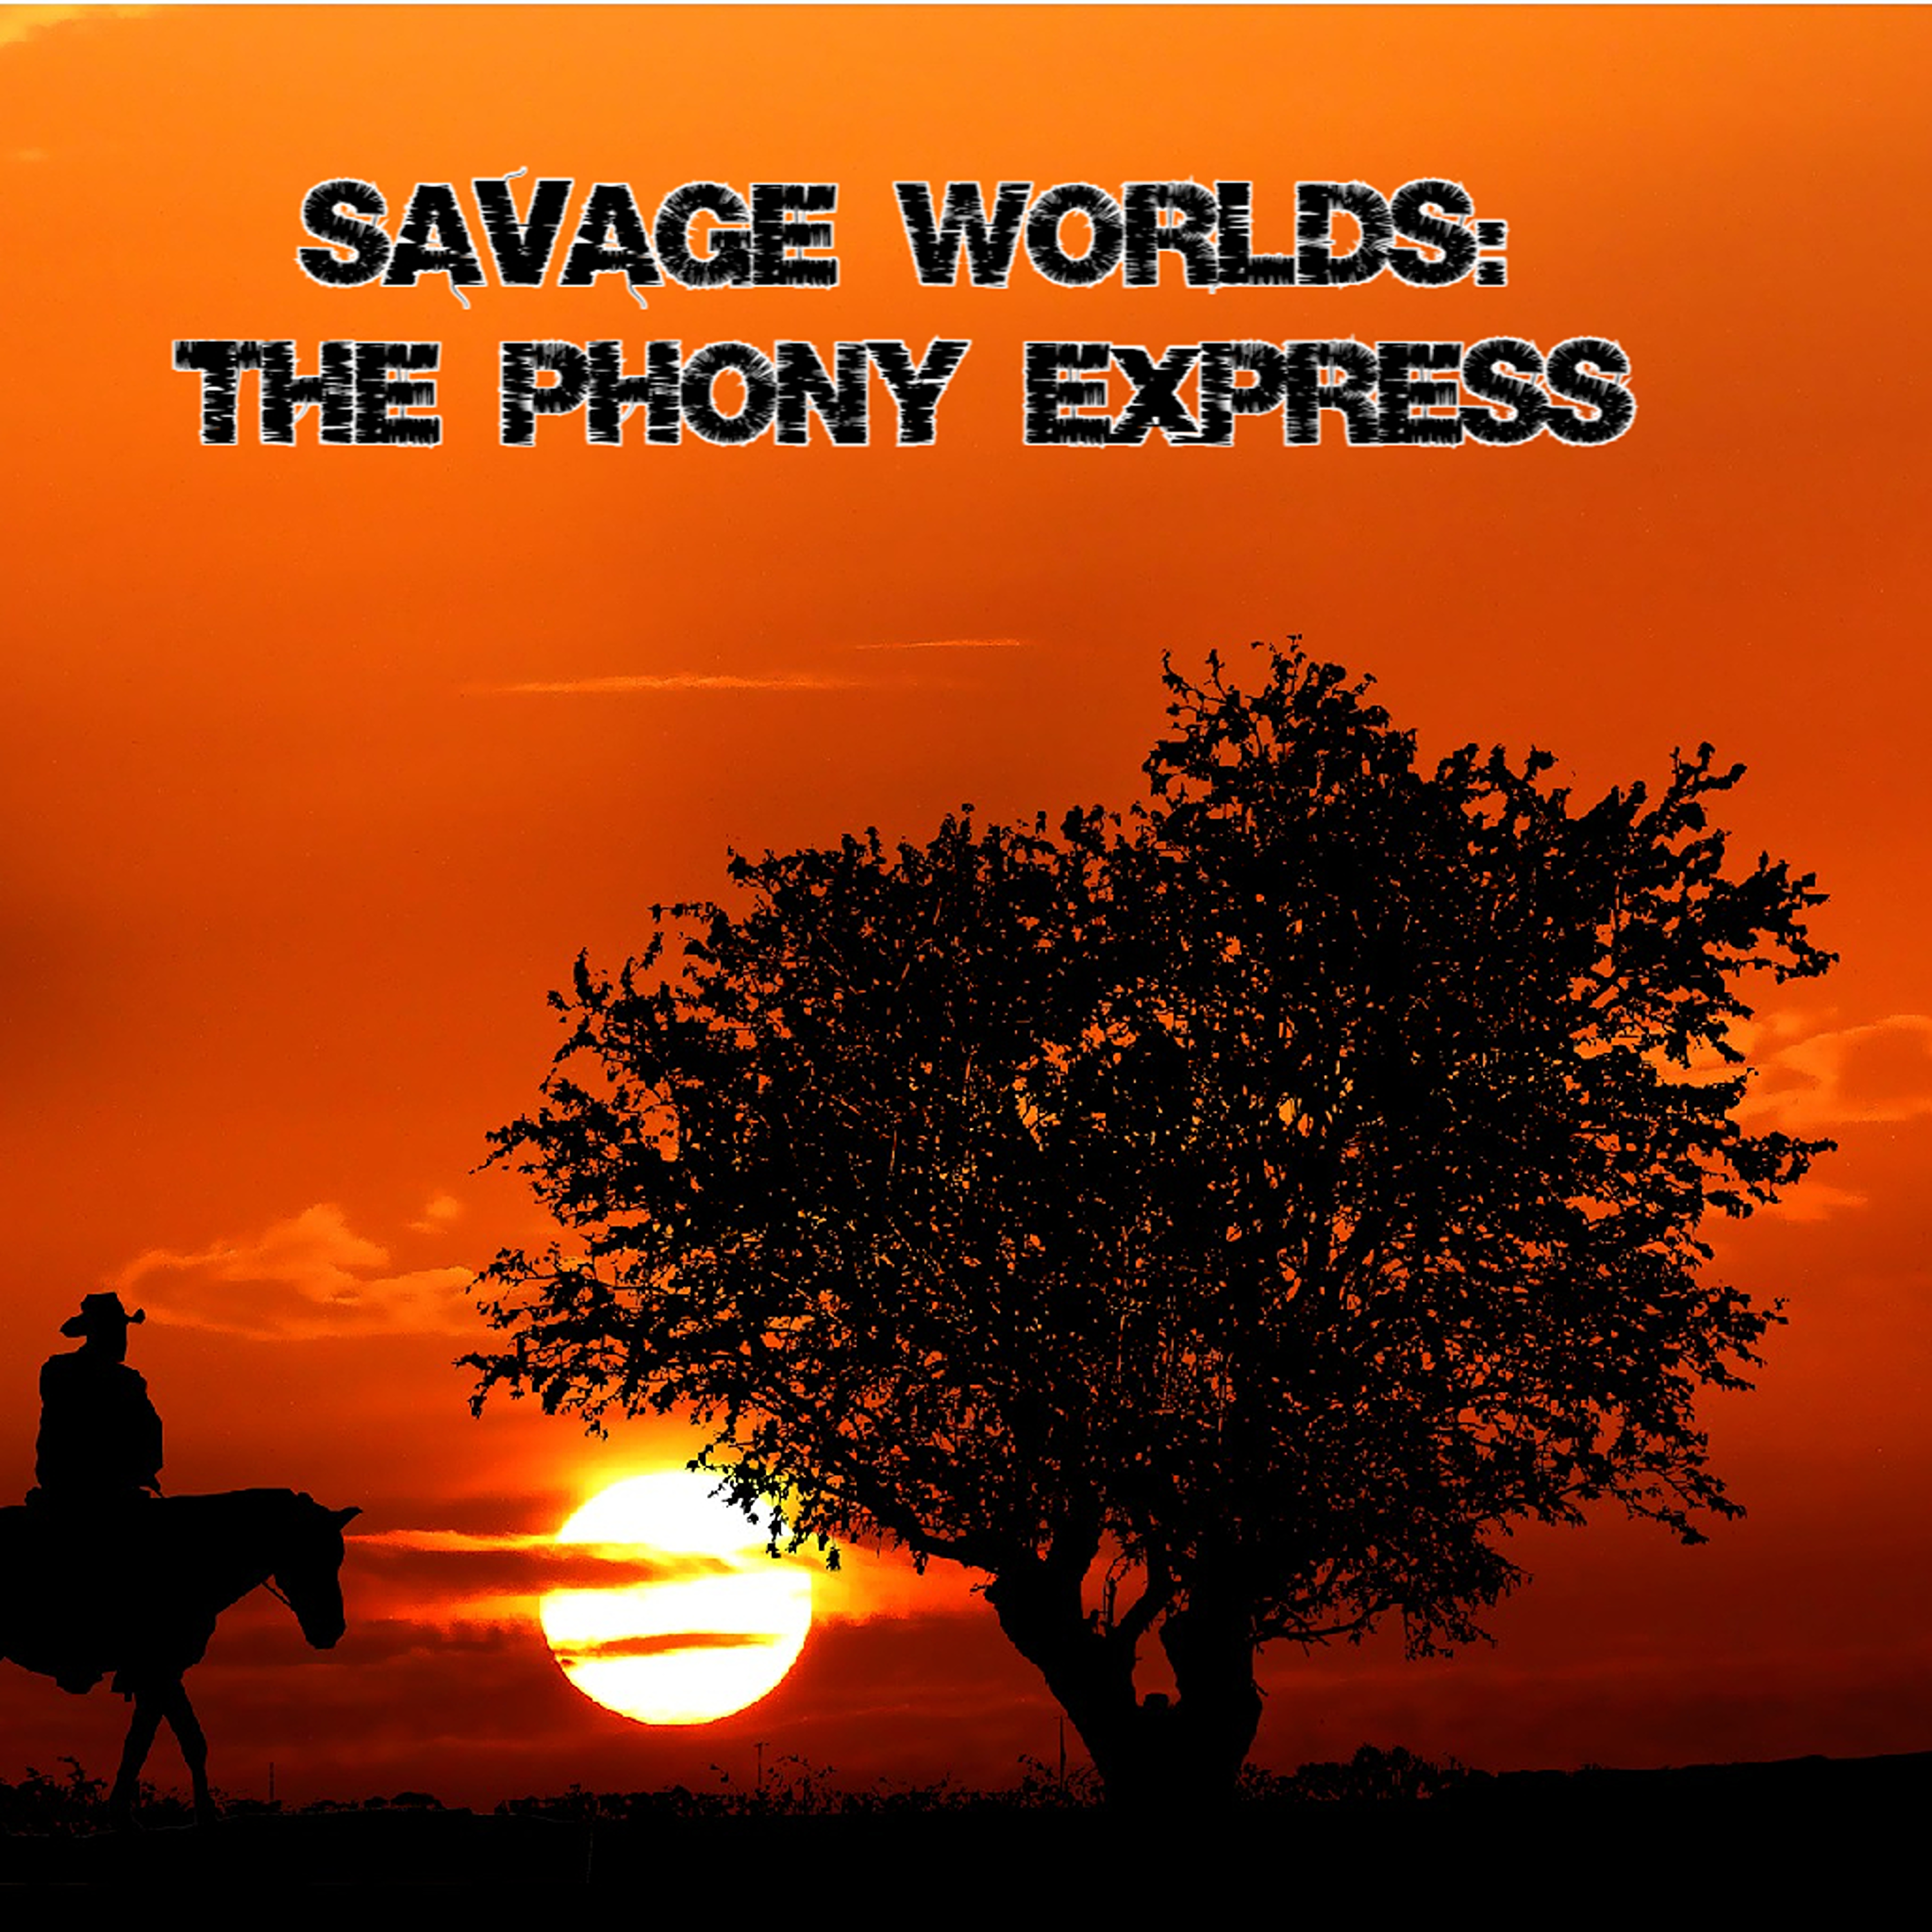 Savage Worlds - The Phony Express 1.2: Eagles, Steeds, And Petrified Seeds